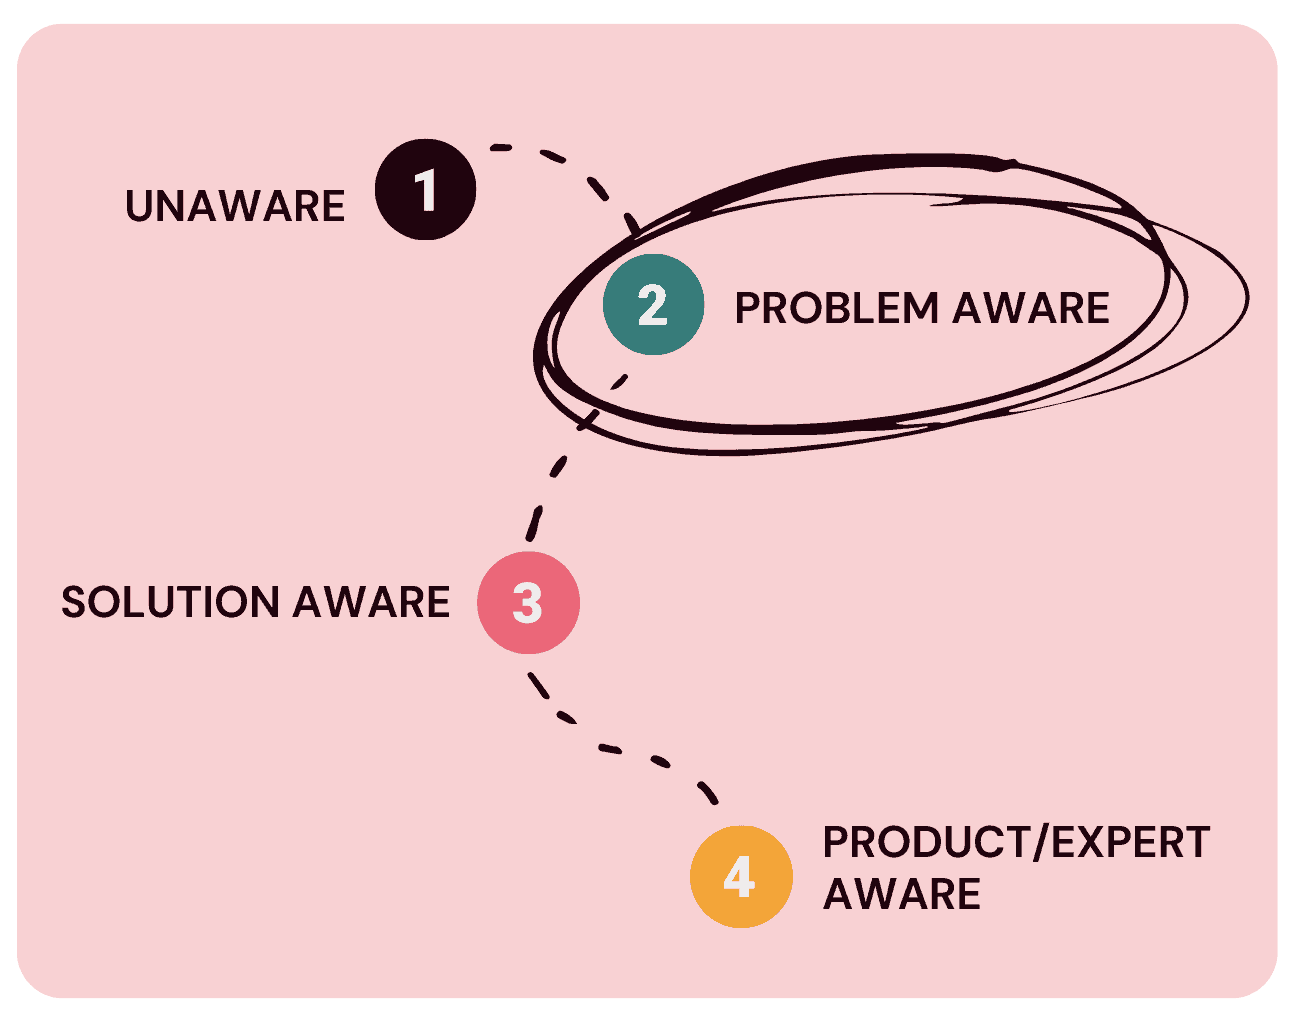 a diagram showing the stages of problem awareness of potential buyers